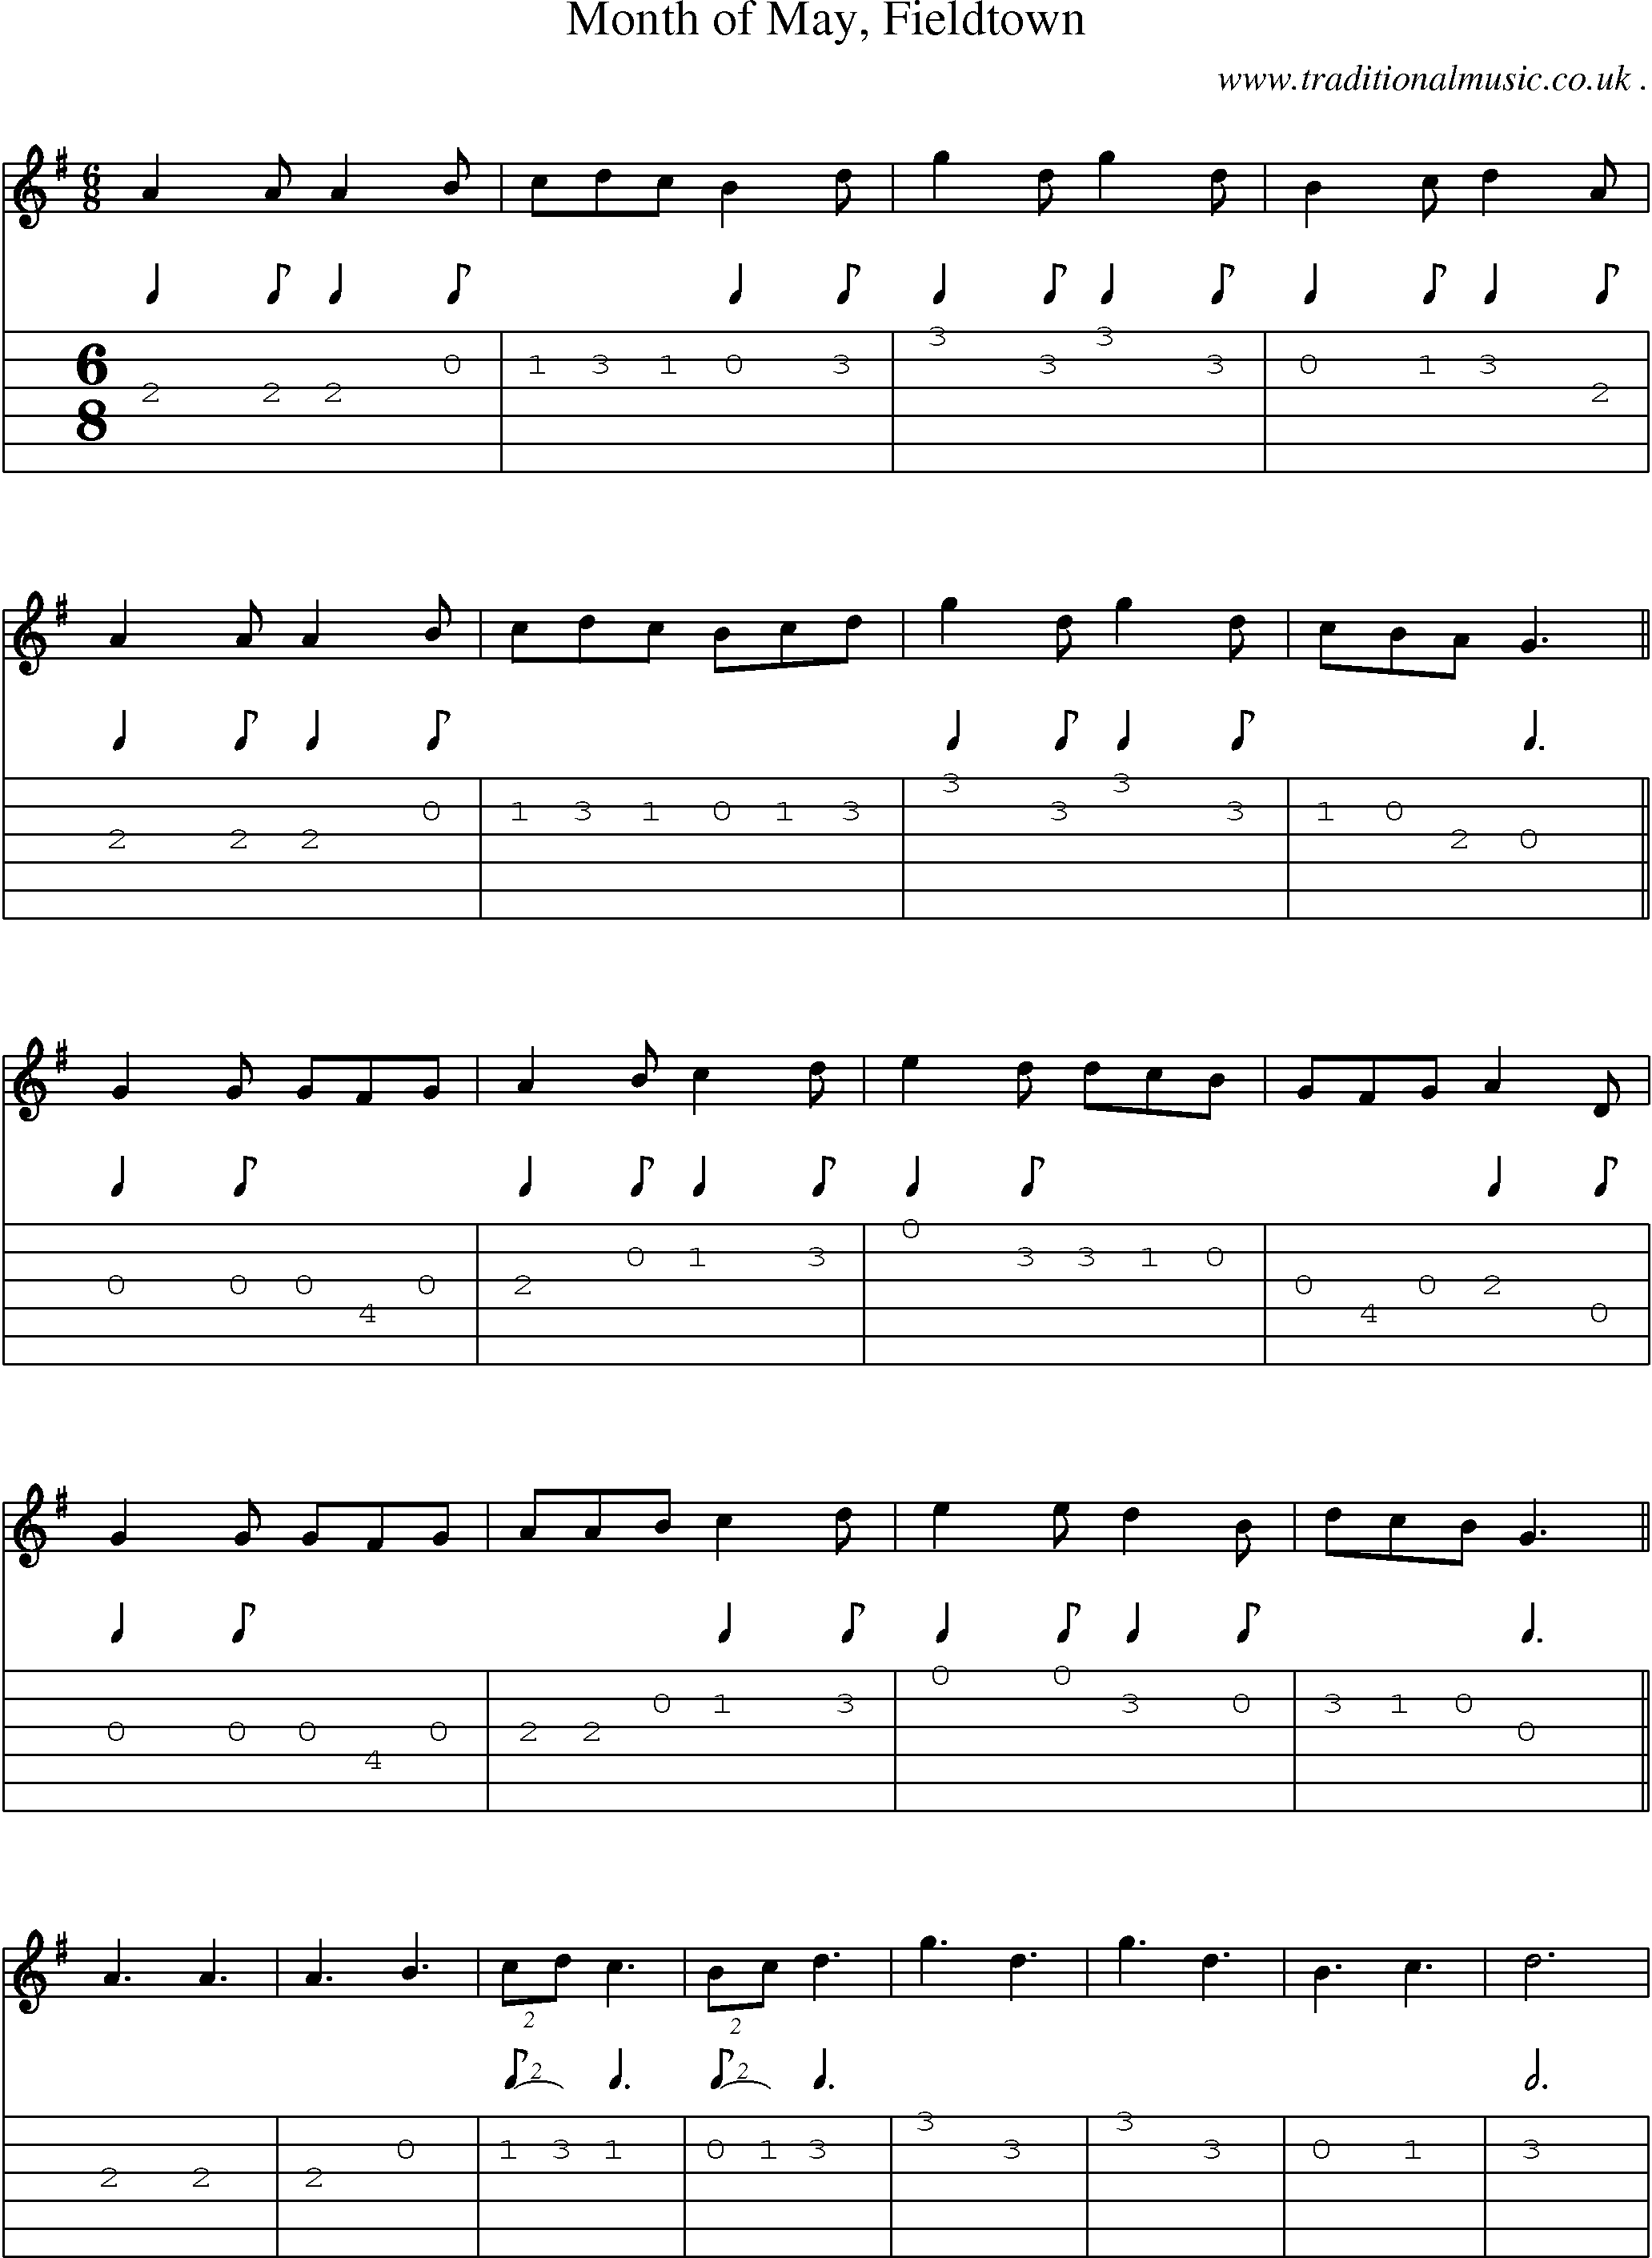 Sheet-Music and Guitar Tabs for Month Of May Fieldtown